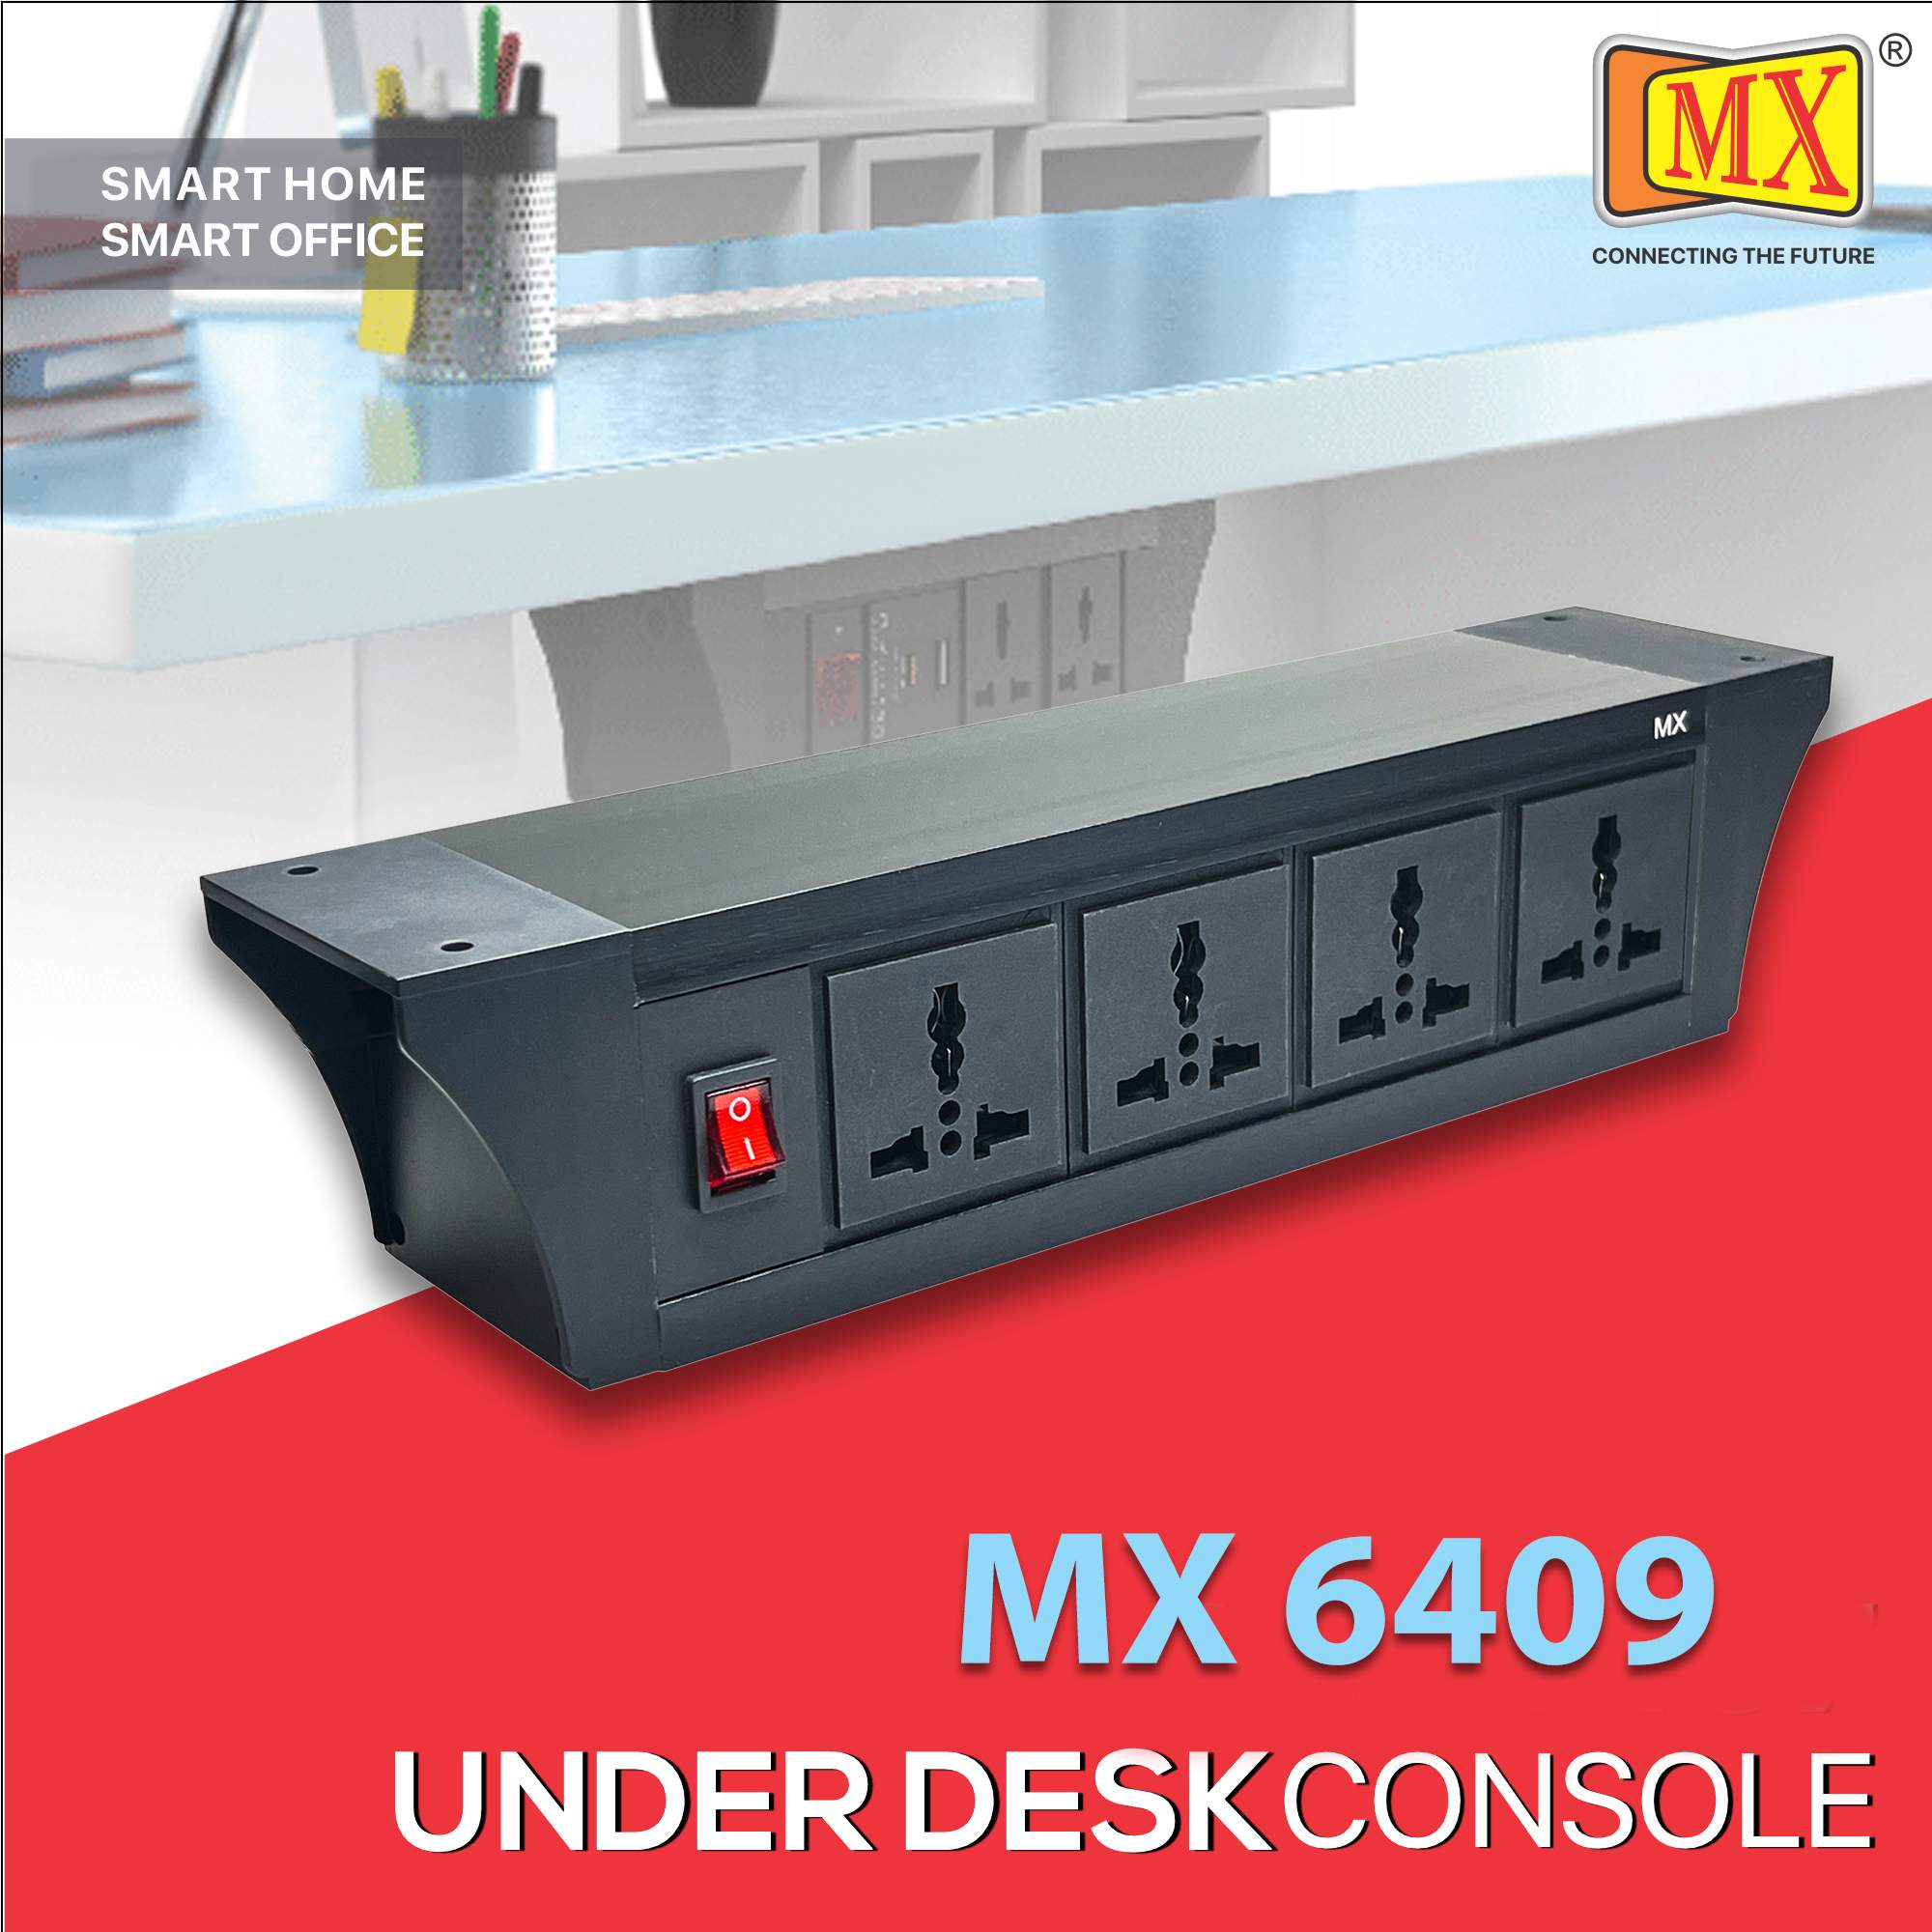 MX PDU Under table 6/13 Amps 4 Universal Socket | 2 USB (2.4 Amp) with Dual Pole LED Indicator Switch | 6 Amps Heavy Duty Cord 1.5 Meter with ISI Marked, Aluminum Body Material (MX-6409-1.5M Black)